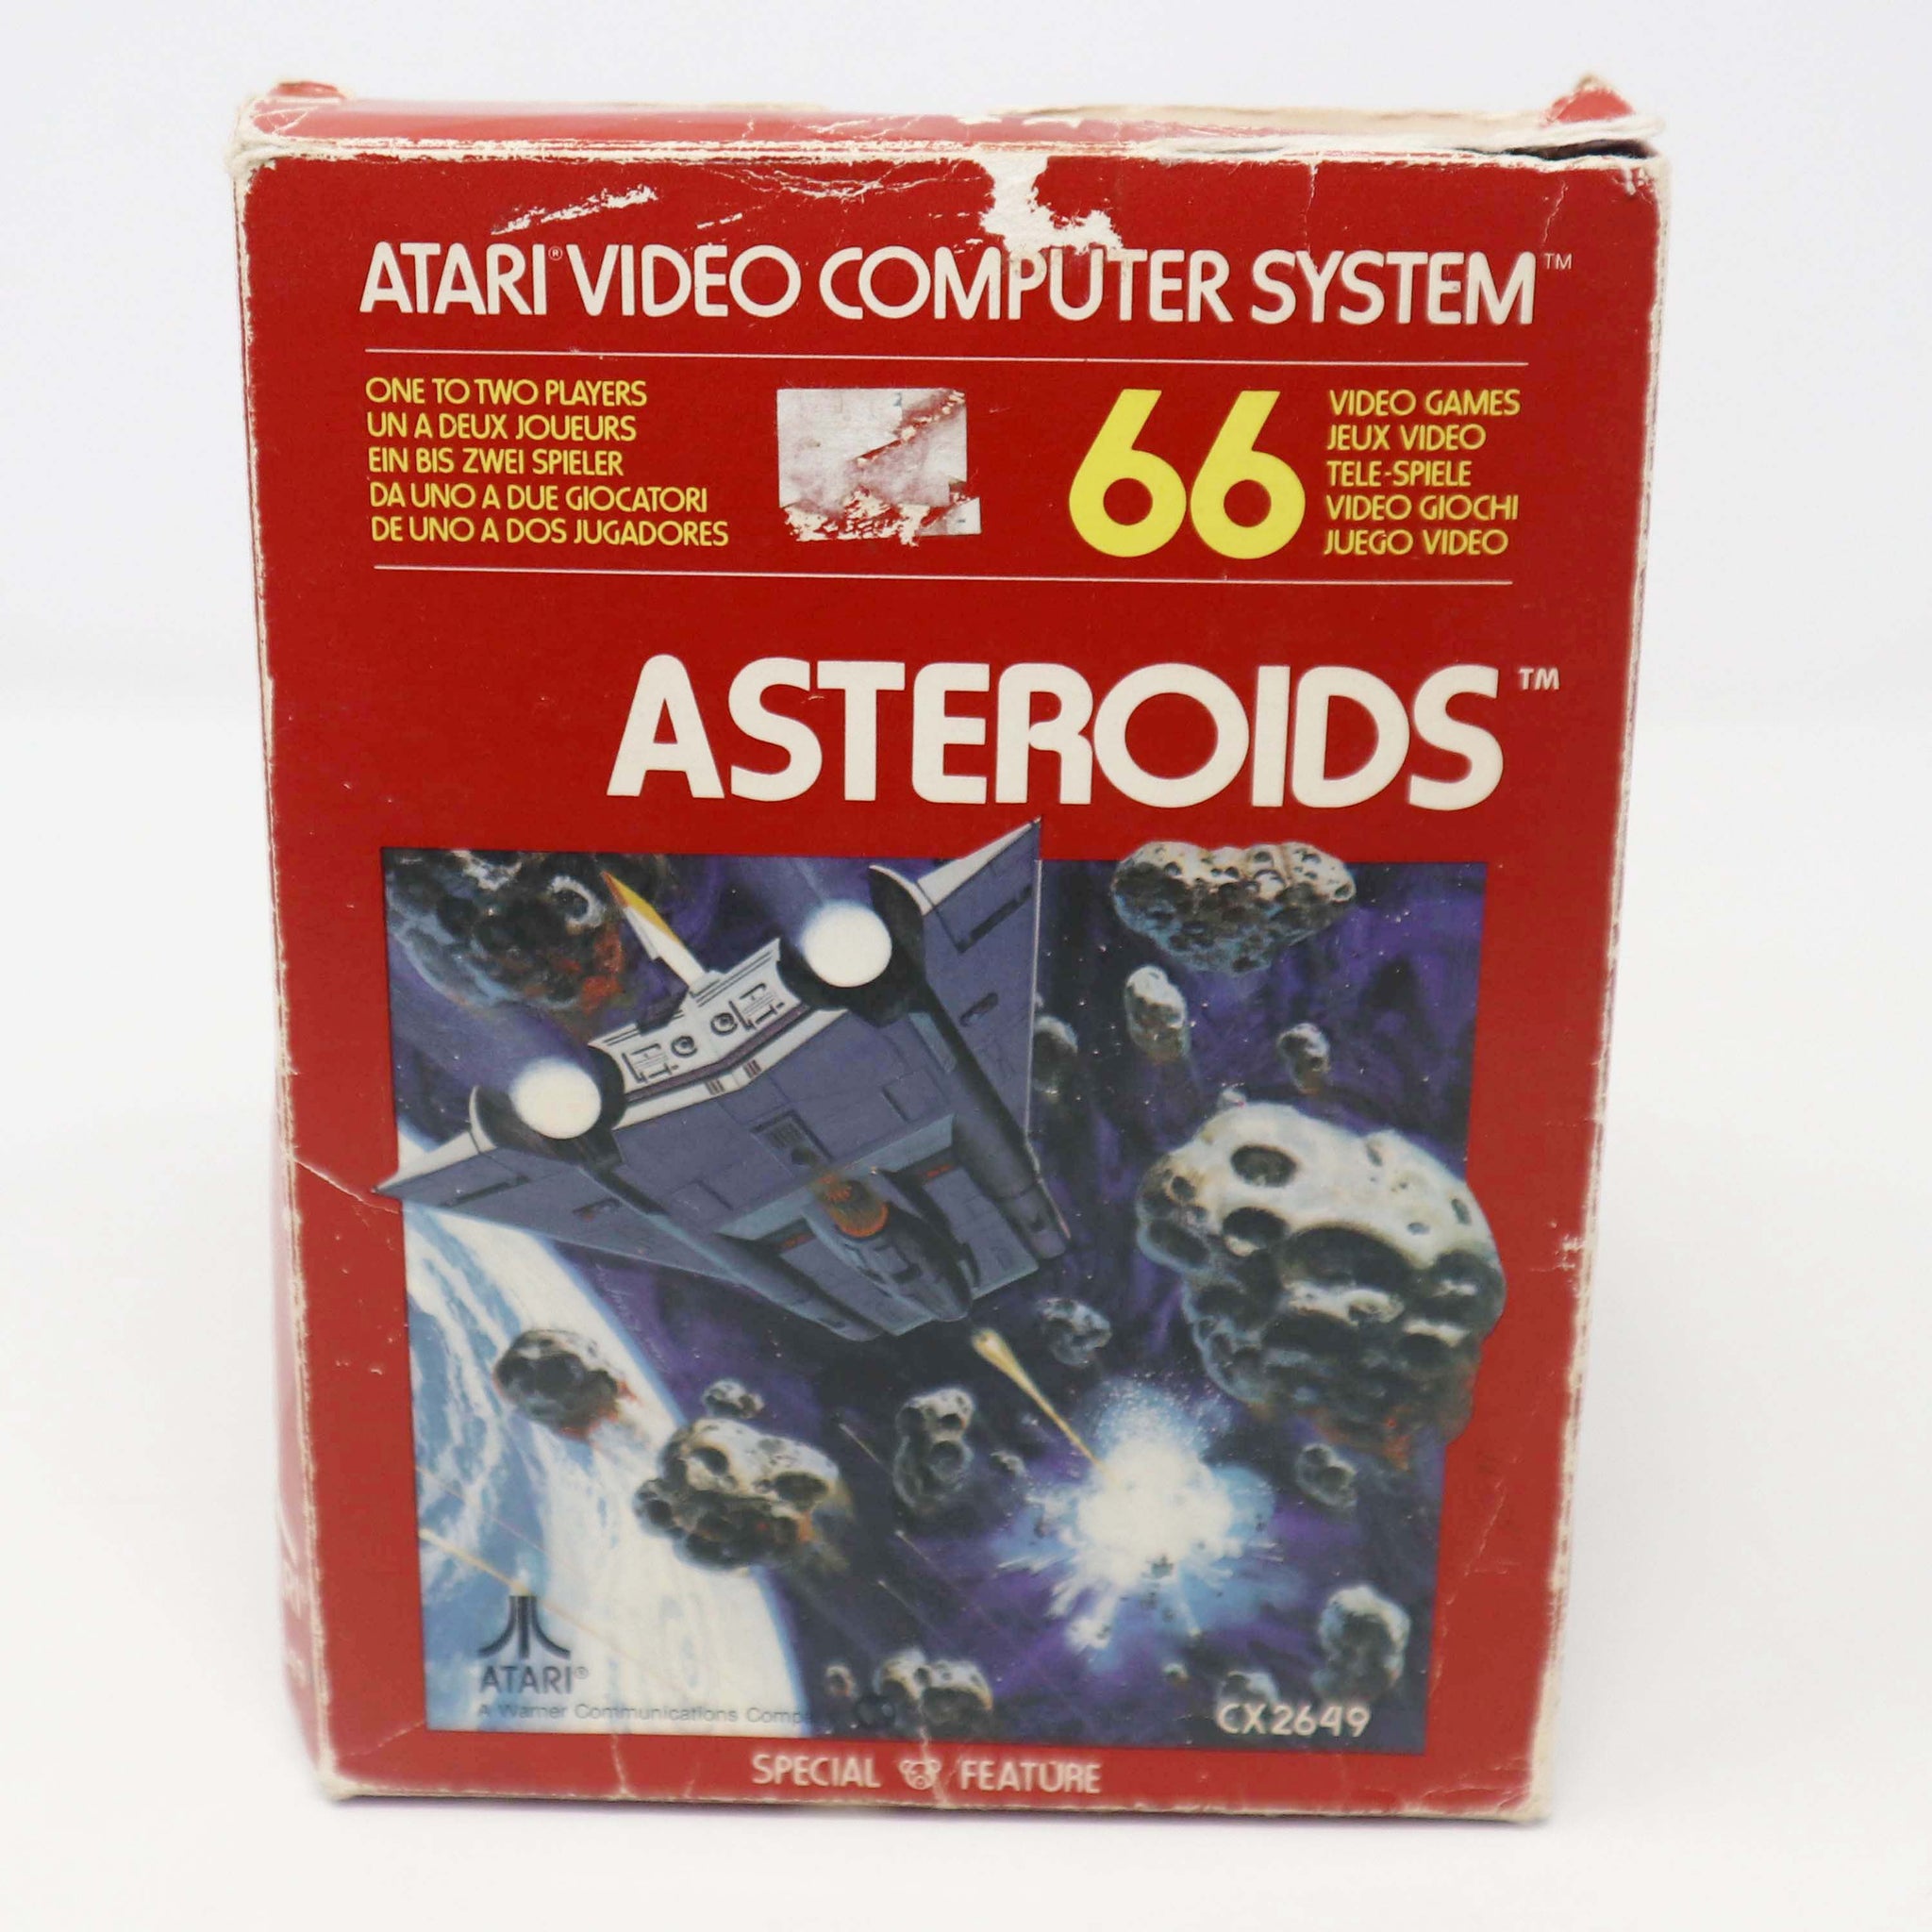 Vintage 1979 70s Atari 2600 Asteroids CX2649 Video Game Cartridge For The Atari Video Computer System Boxed